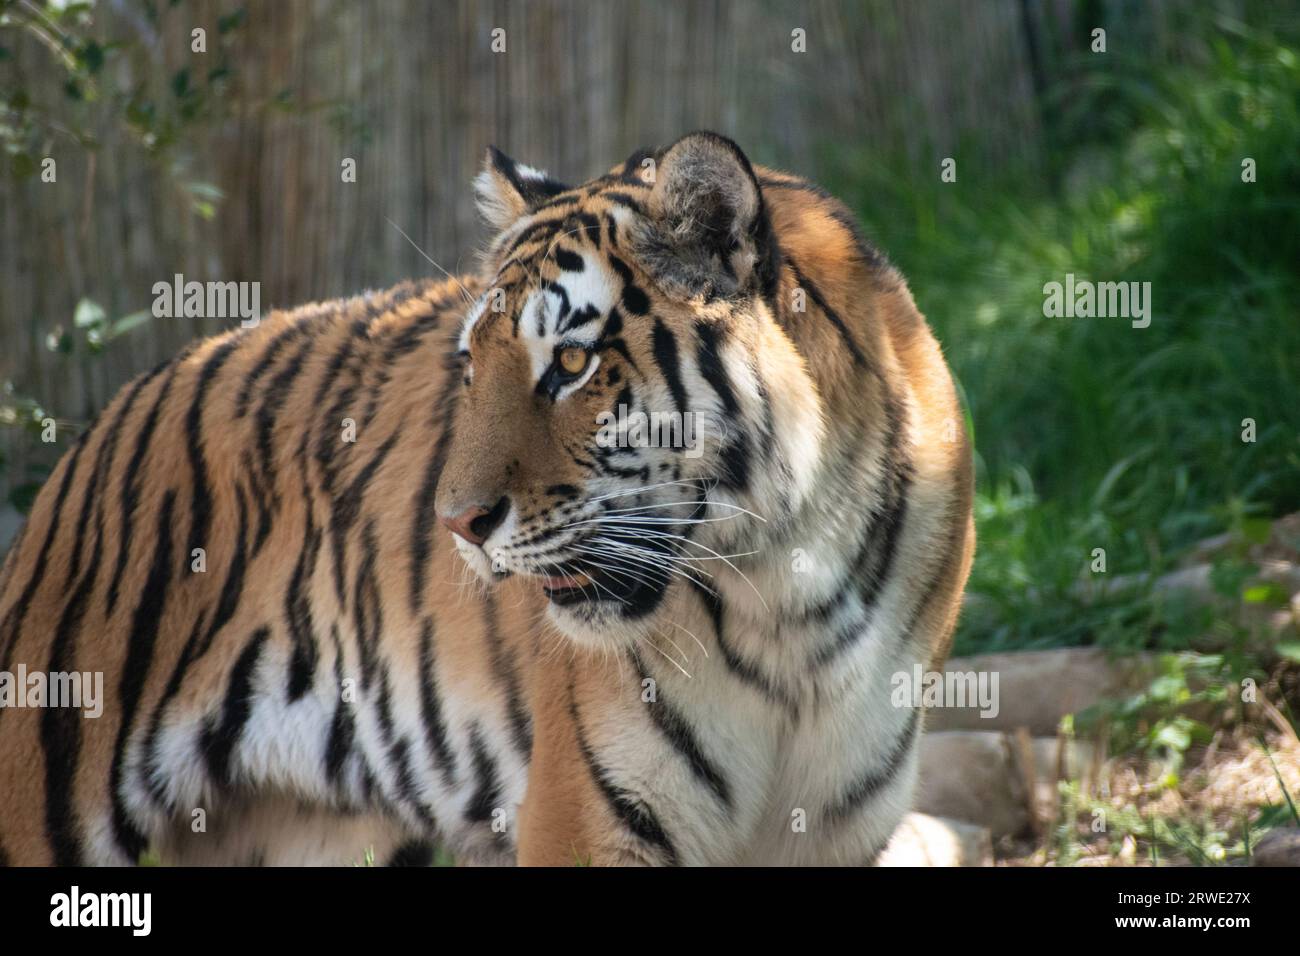 A tiger in the Utah Zoo Enclosure, with sun beams lighting up its striped fur coat. Stock Photo